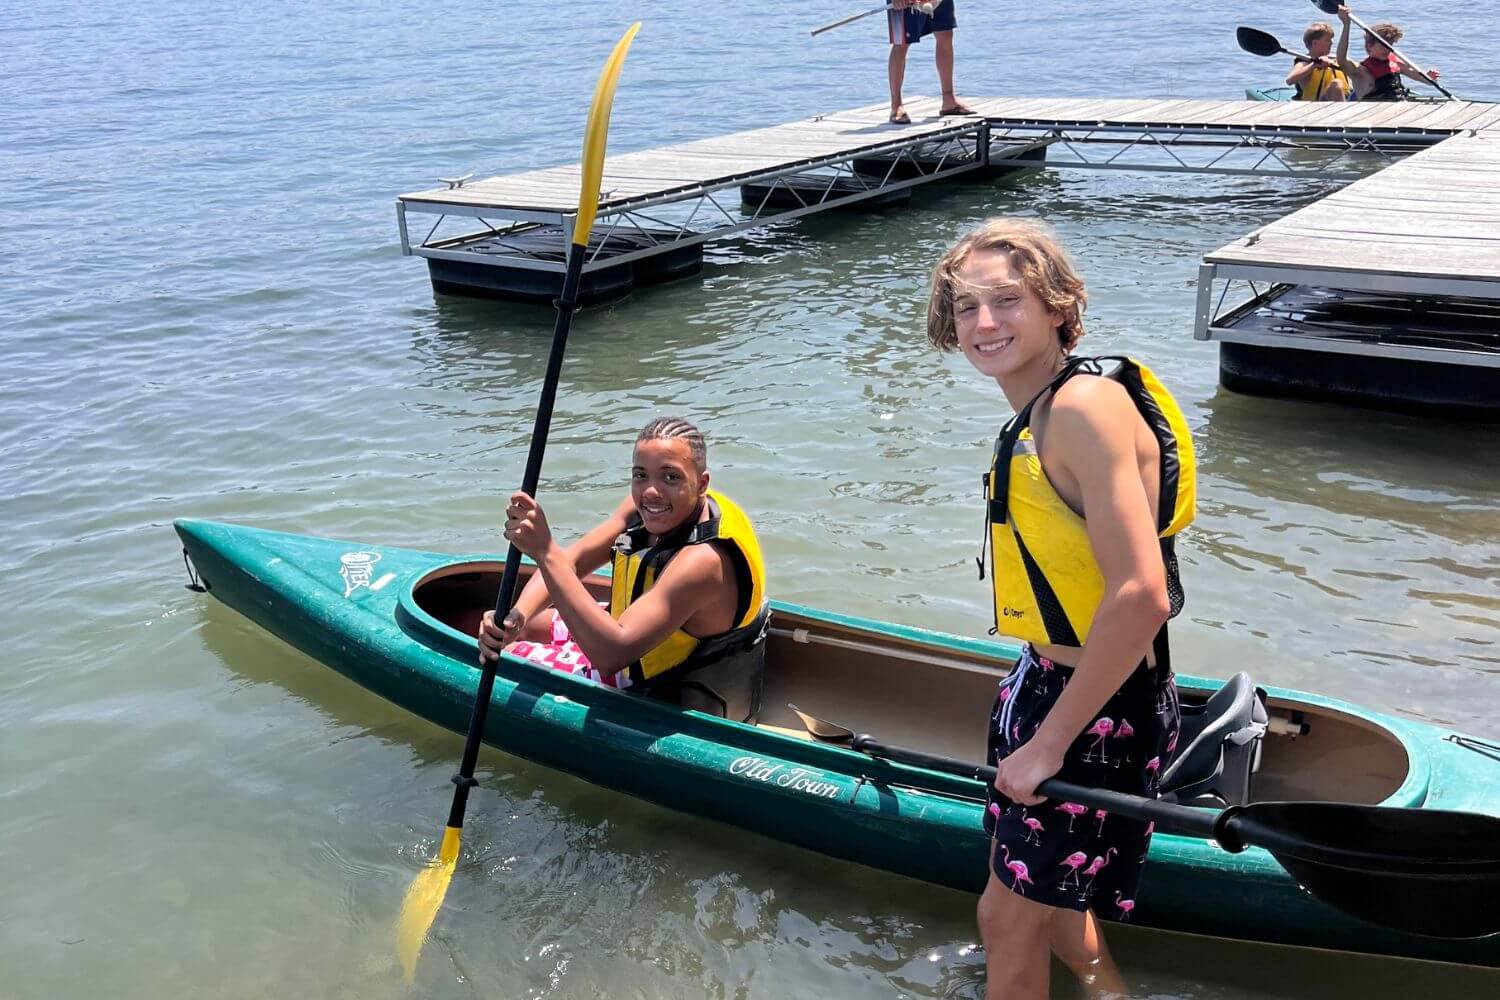 Two boys wearing yellow lifejackets are getting ready to go kayaking in Keuka Lake